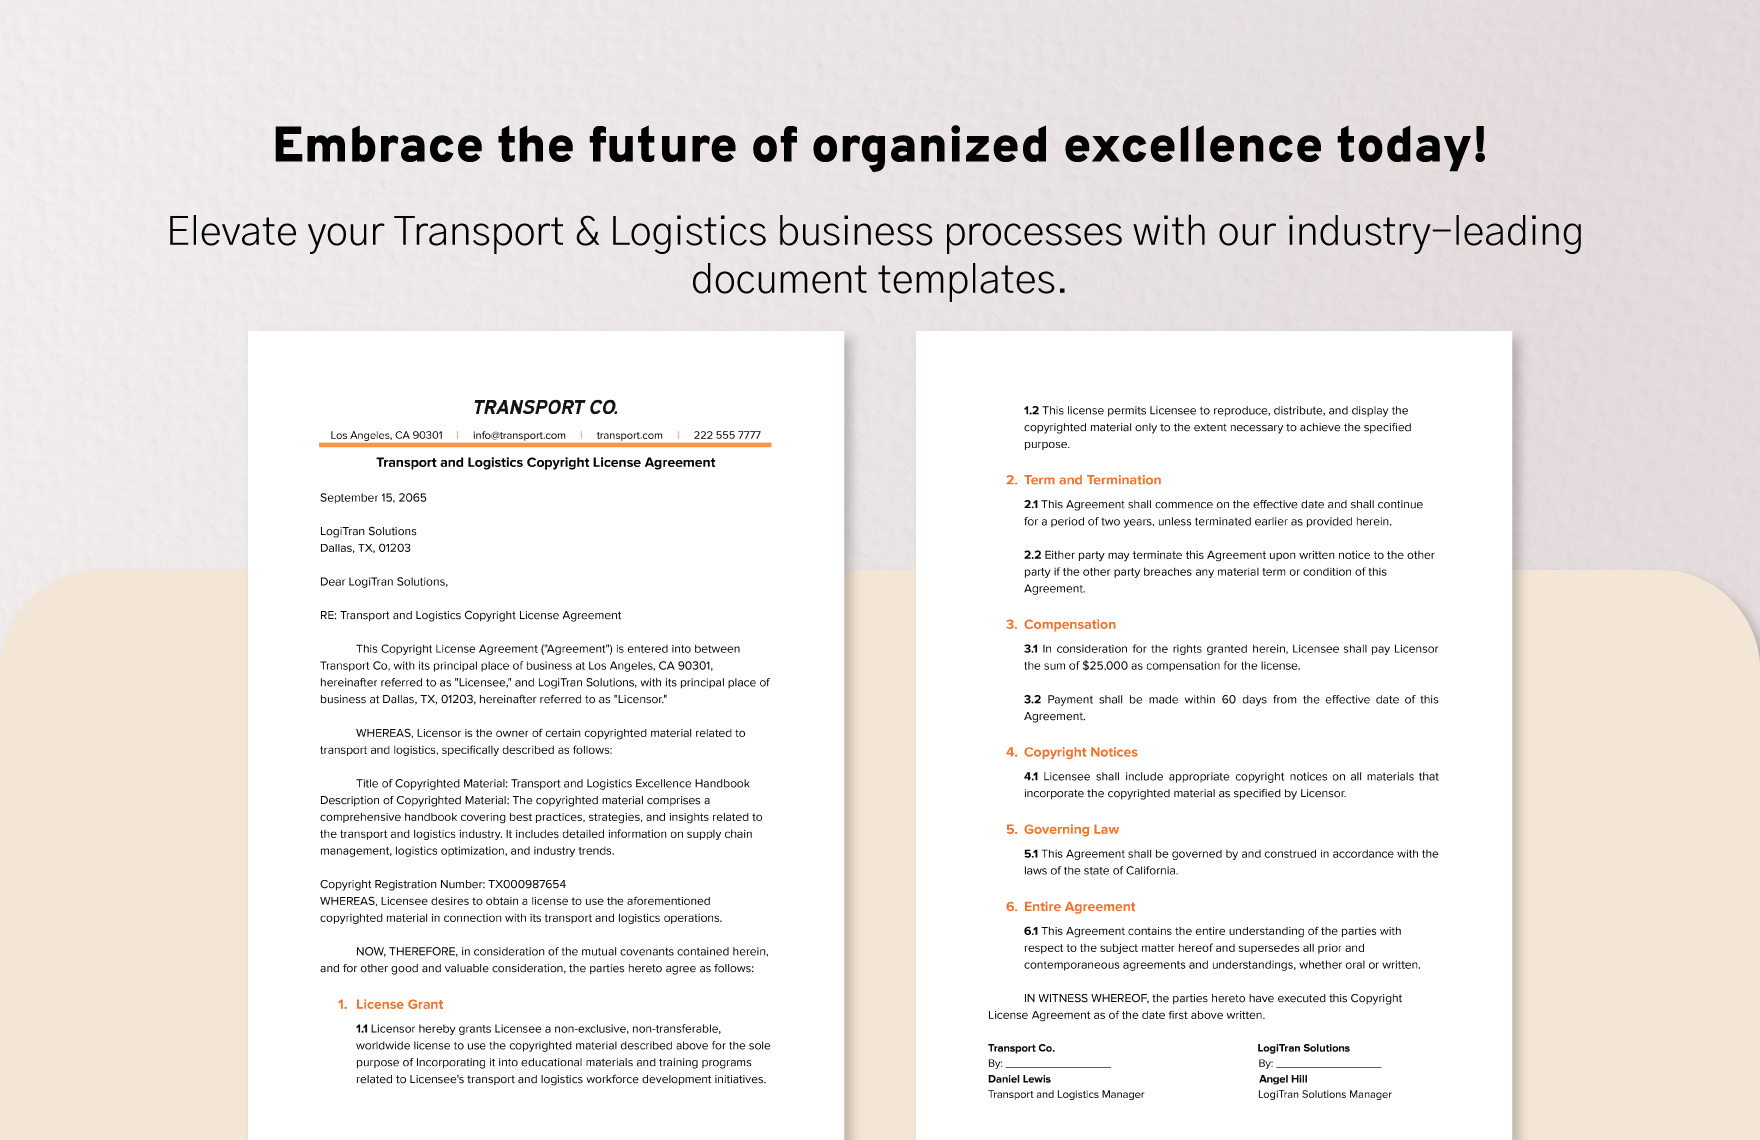 Transport and Logistics Copyright License Agreement Template